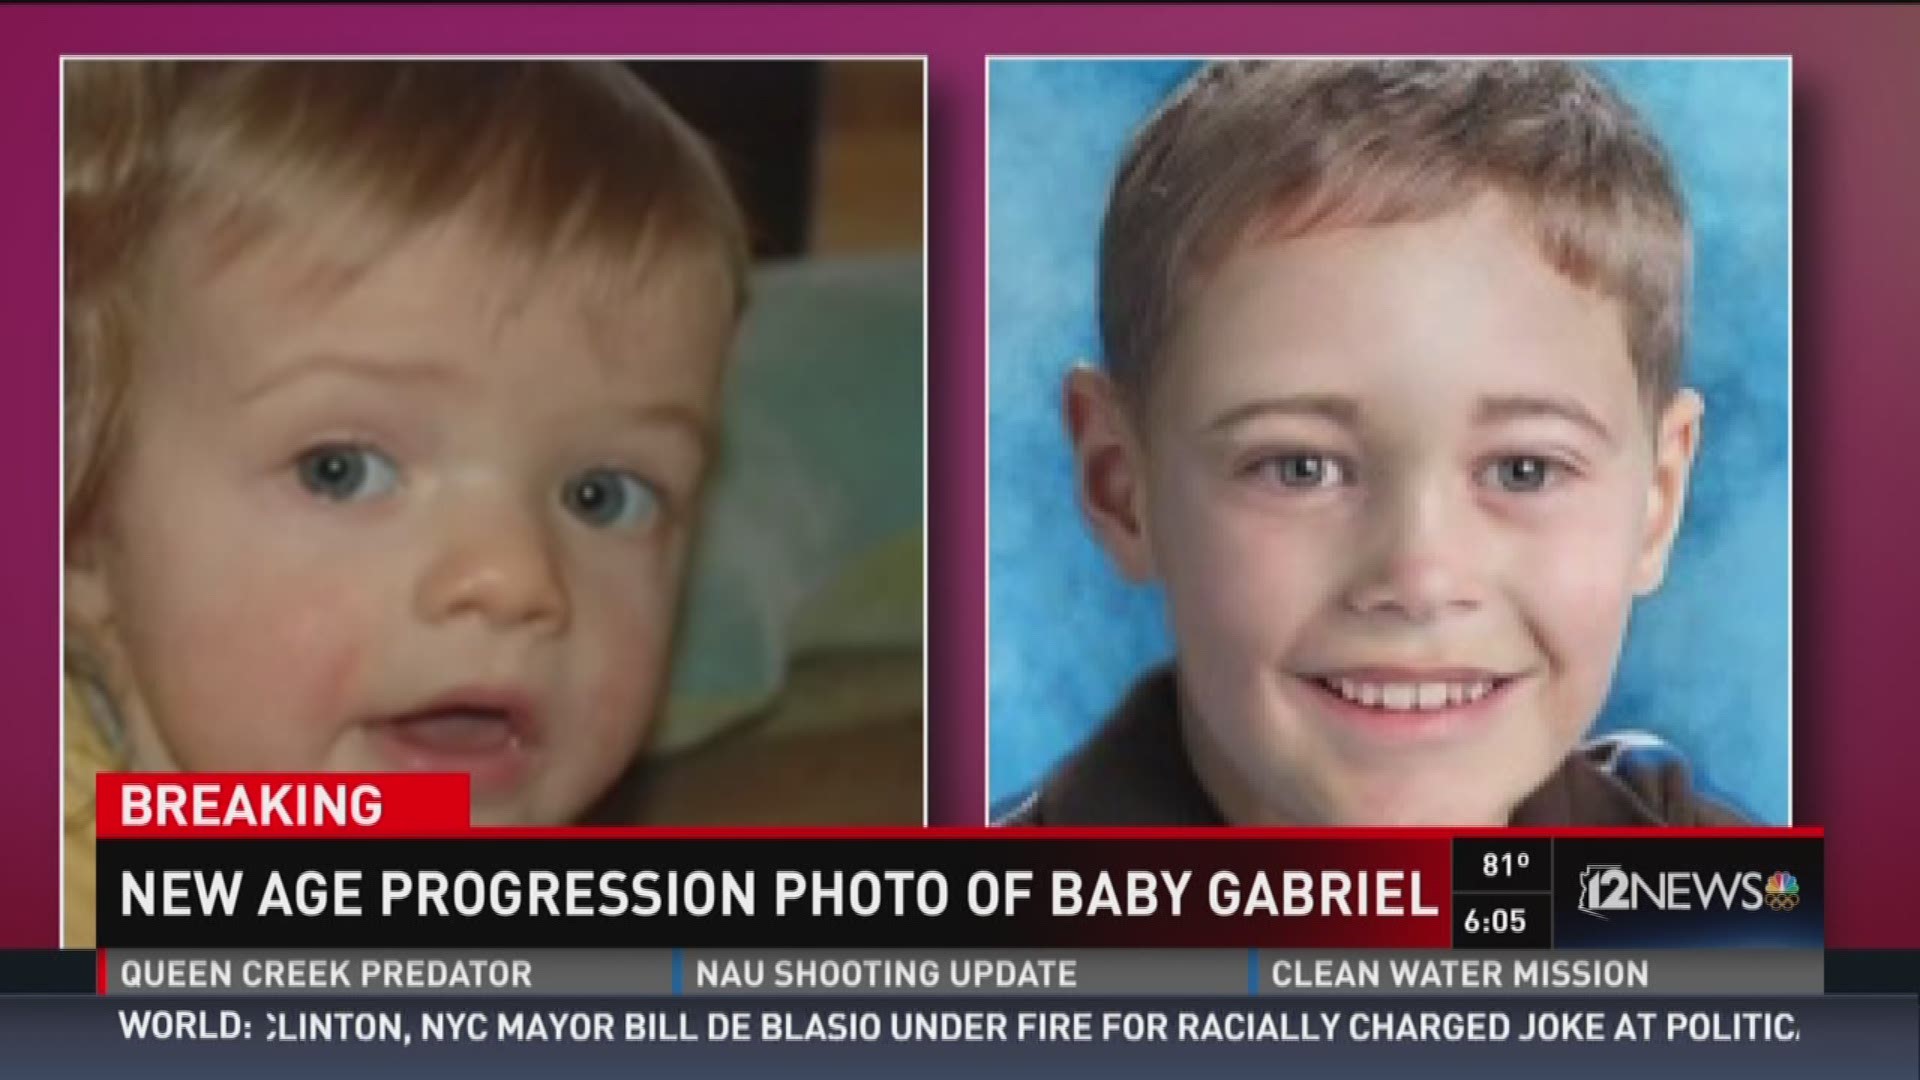 Authorities have released age progressed photos of what baby Gabriel could look like now